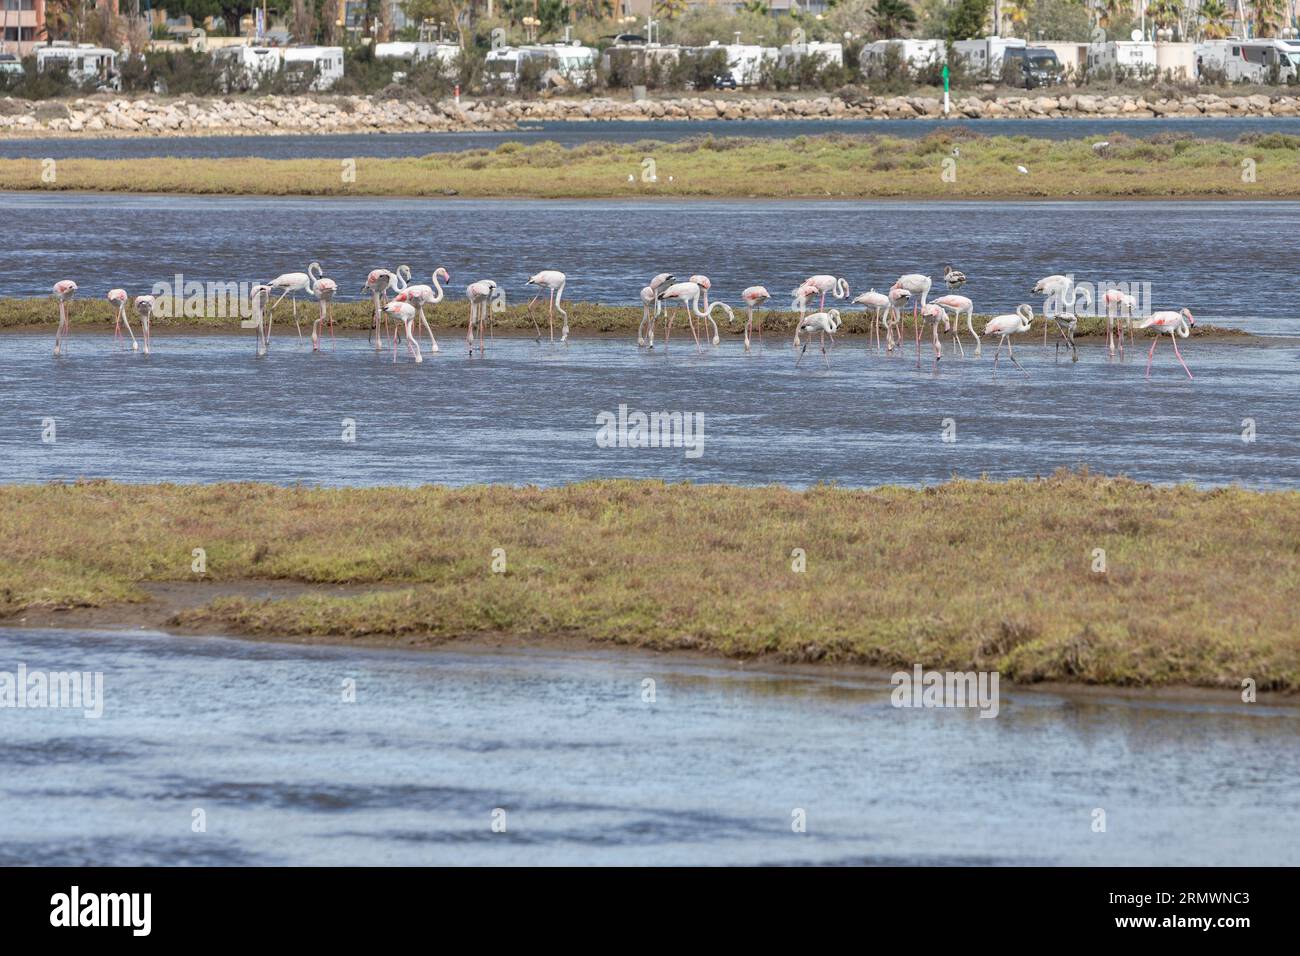 Flamingos in an etang near to Gruissan in the South of France Stock Photo